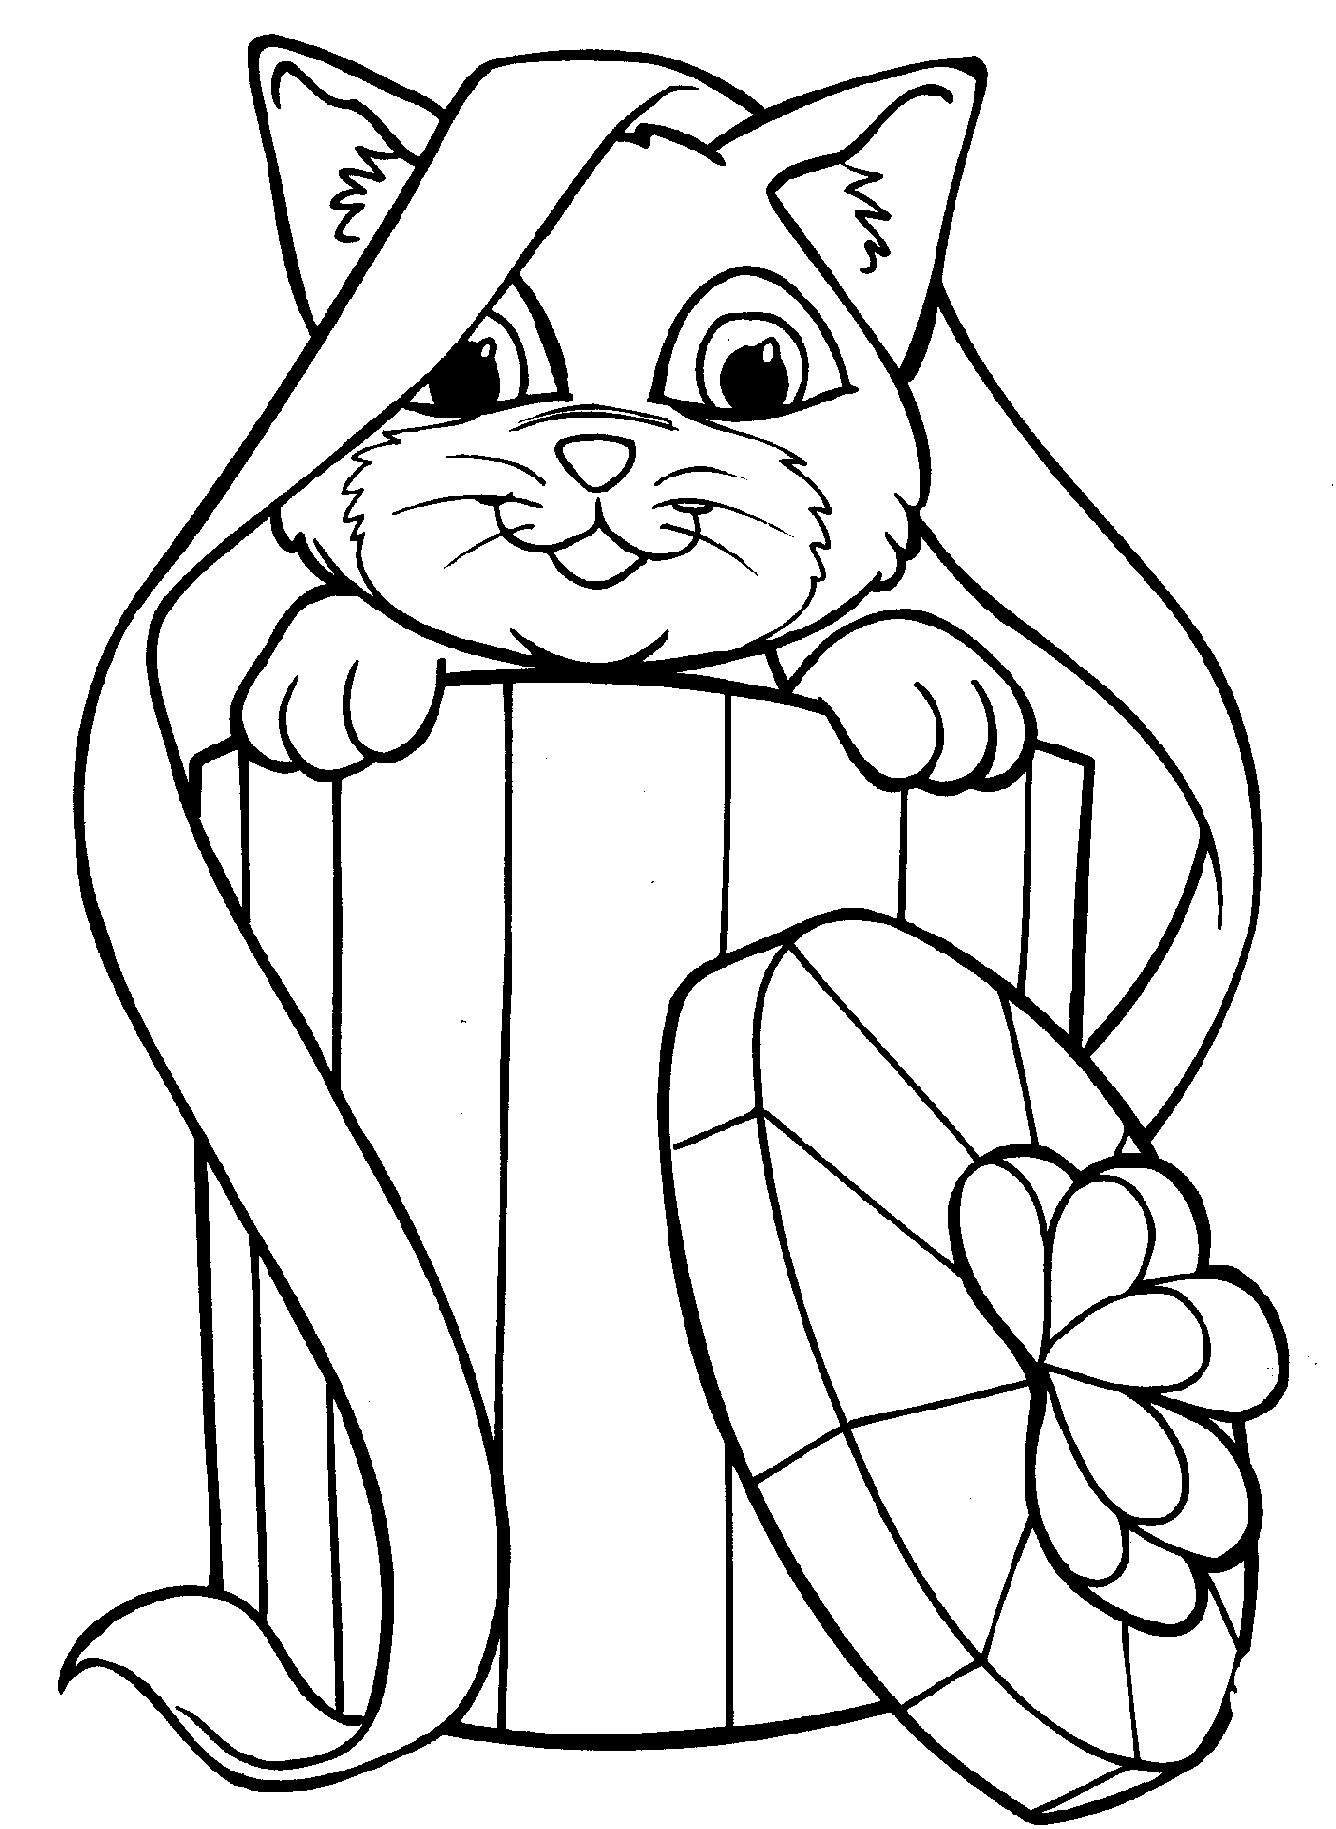 Coloring Sheets Kids
 Free Printable Kitten Coloring Pages For Kids Best